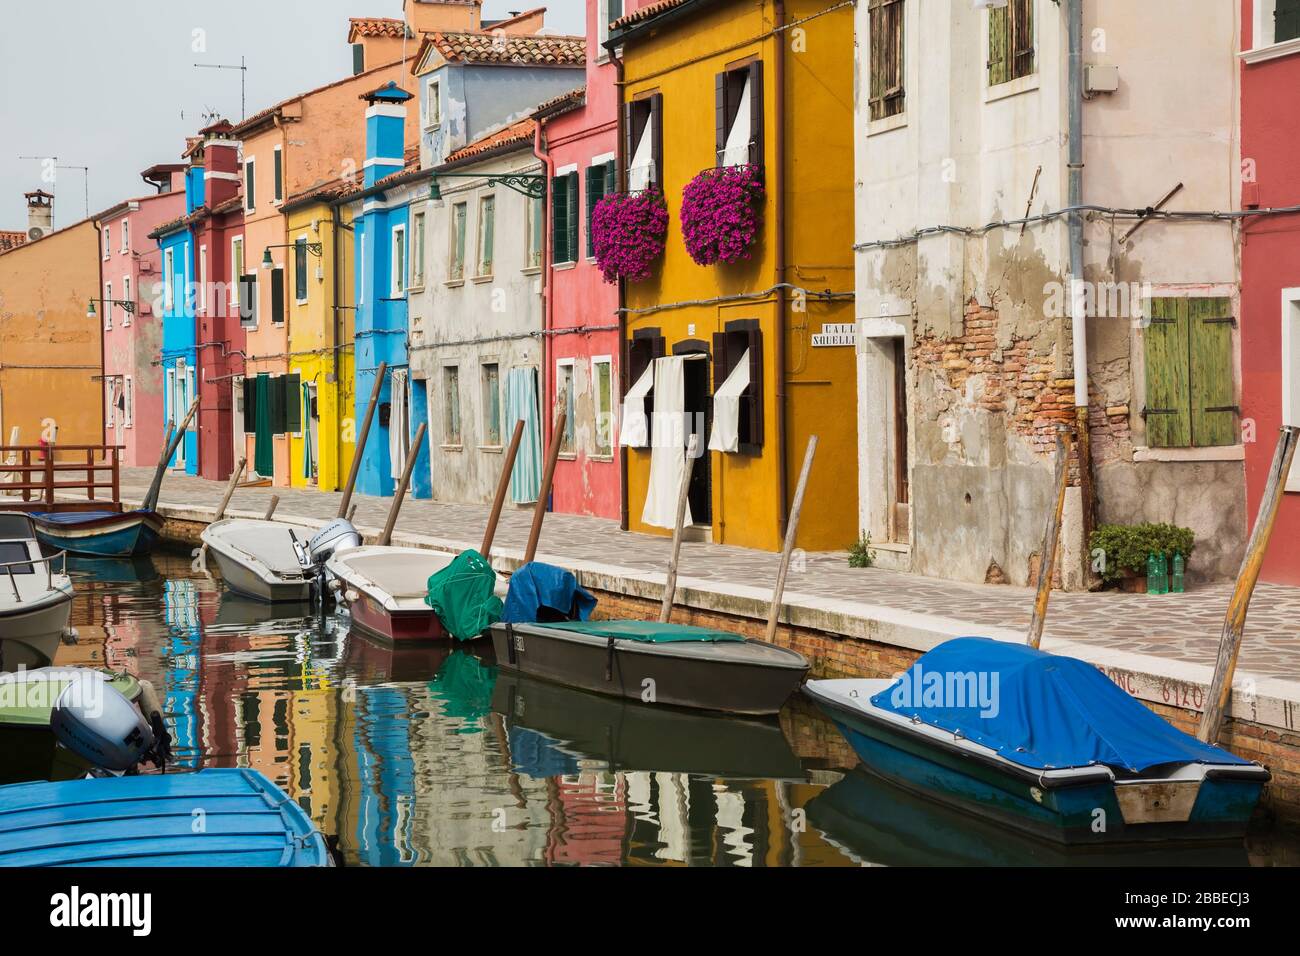 Moored boats on canal lined with colourful stucco houses decorated with striped curtains over entrance doors and windows, Burano Island, Venetian Lagoon, Venice, Veneto, Italy Stock Photo